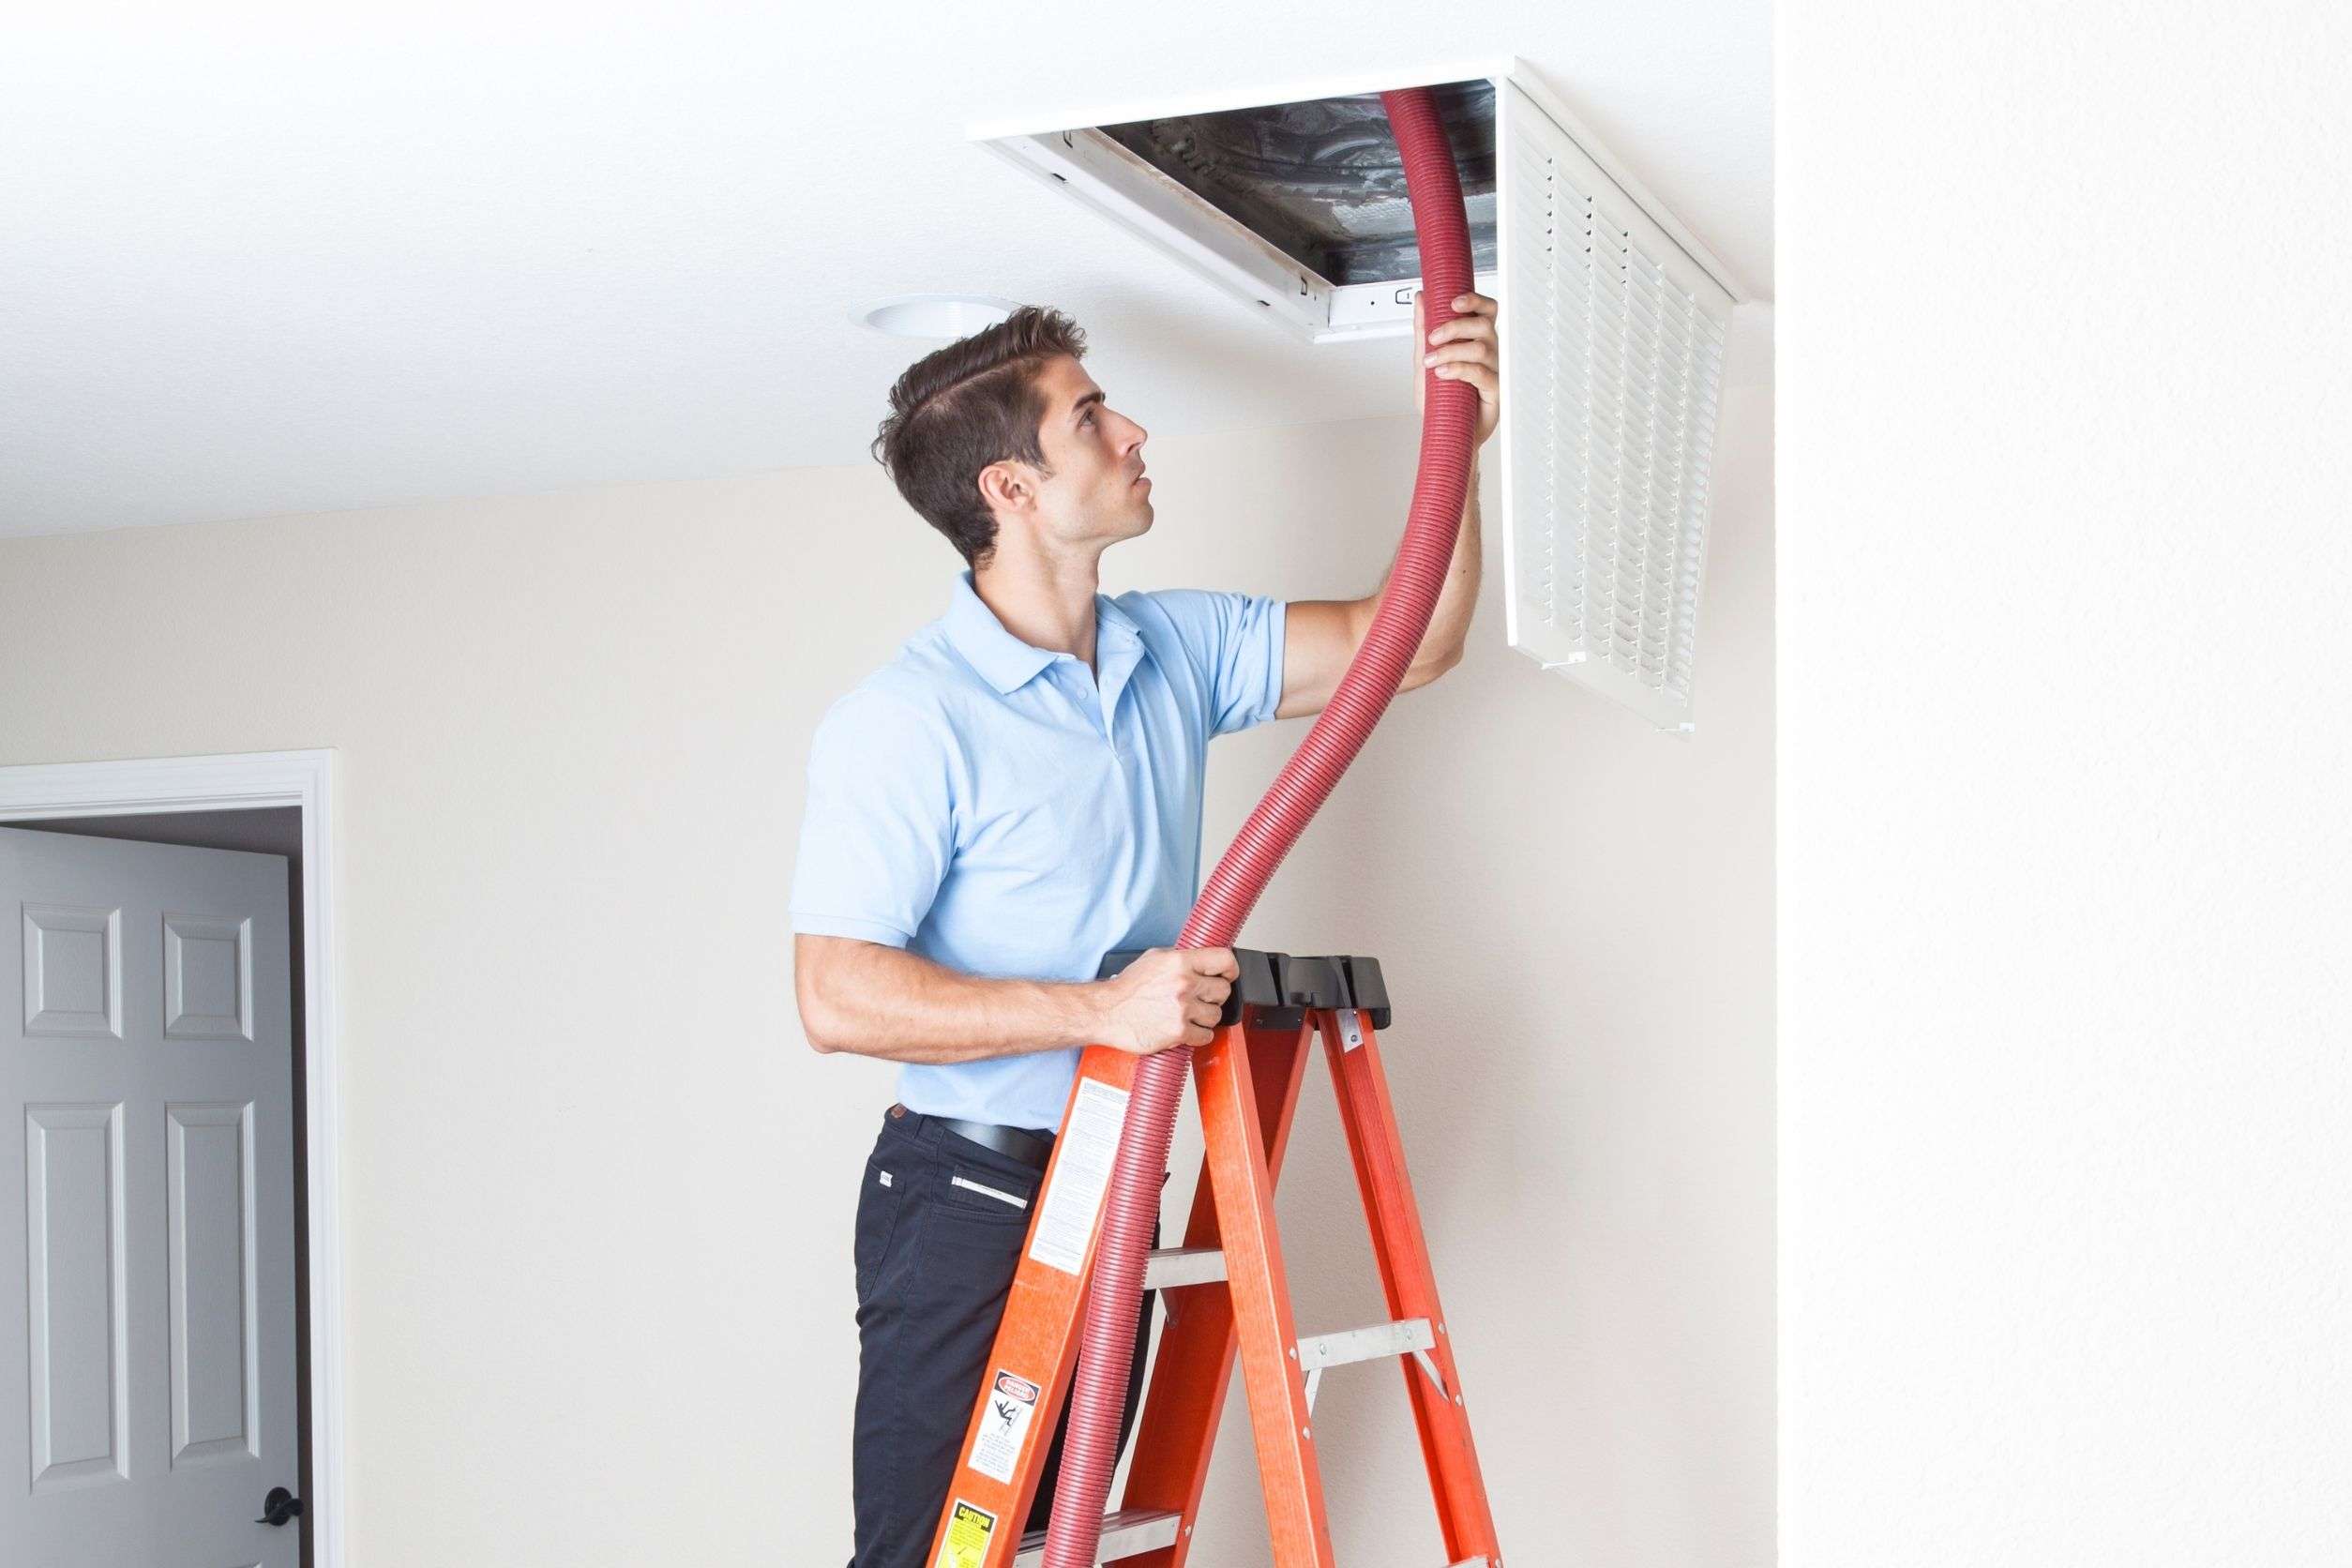 A tech is doing duct cleaning at a home